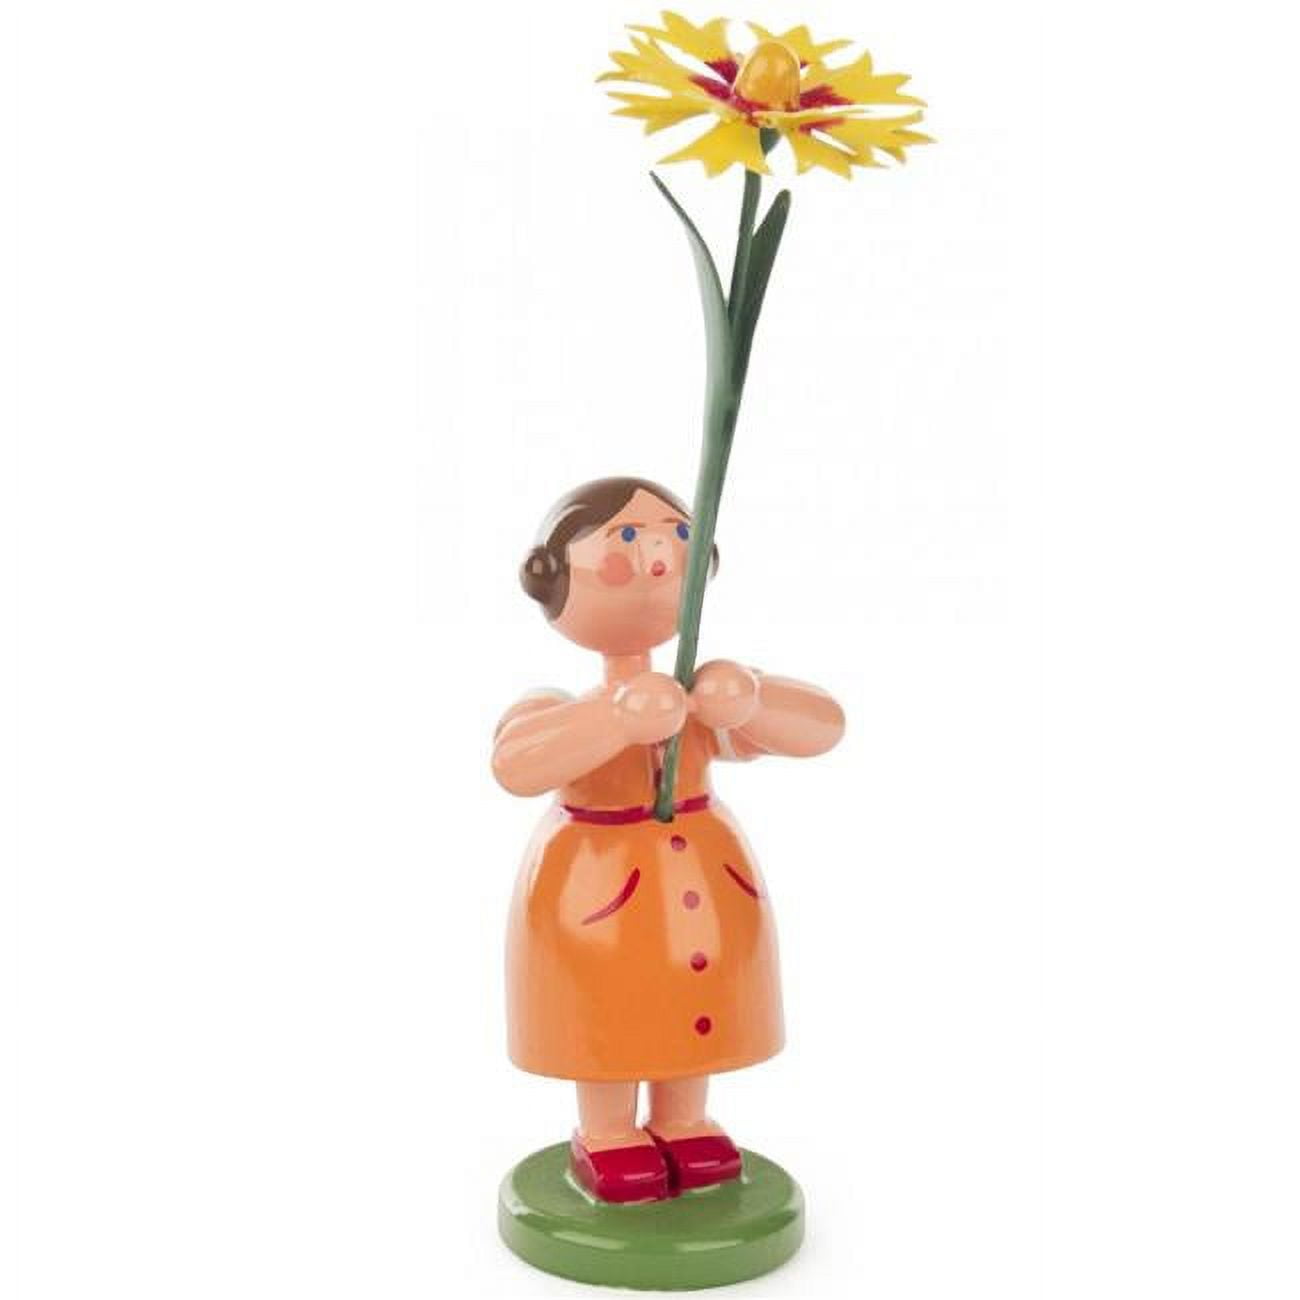 Picture of Alexander Taron 013-2012 Dregno Easter Figurine - Butter Flower Girl - 4.5 x 1.25 x 1.25 in.